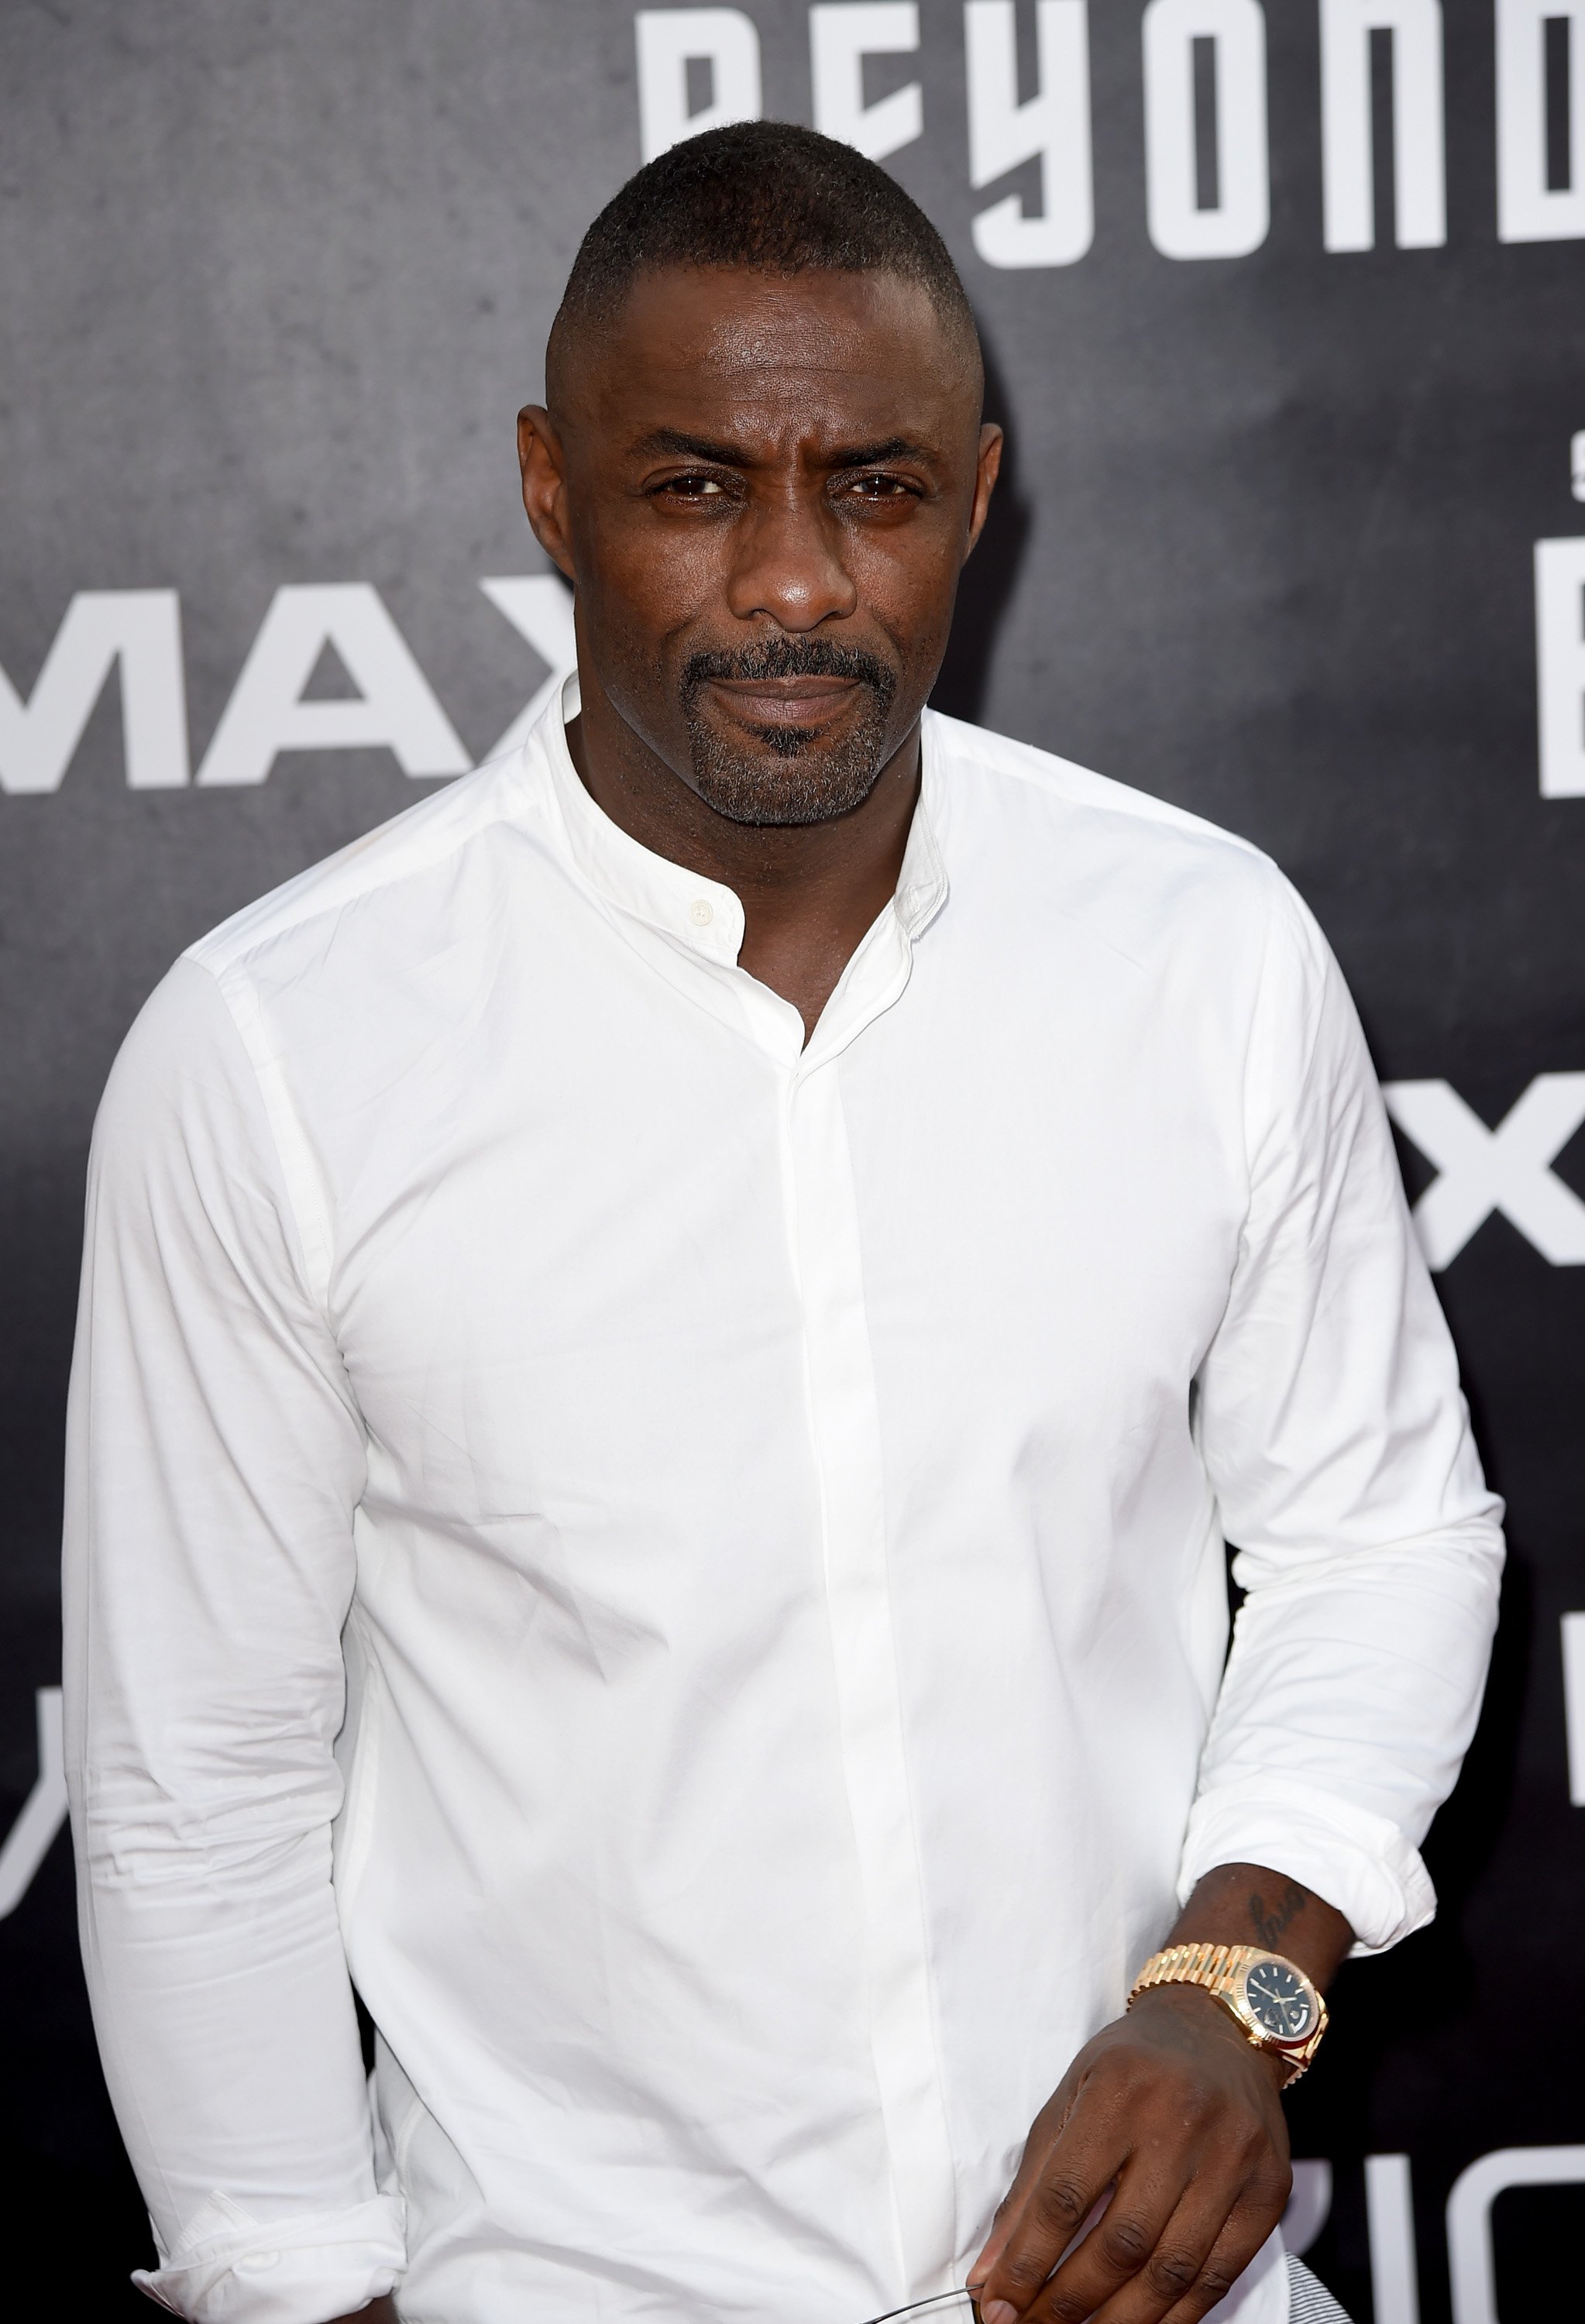 Idris Elba attends the premiere of Paramount Pictures' "Star Trek Beyond" at Embarcadero Marina Park South on July 20, 2016, in San Diego, California. | Source: Getty Images.